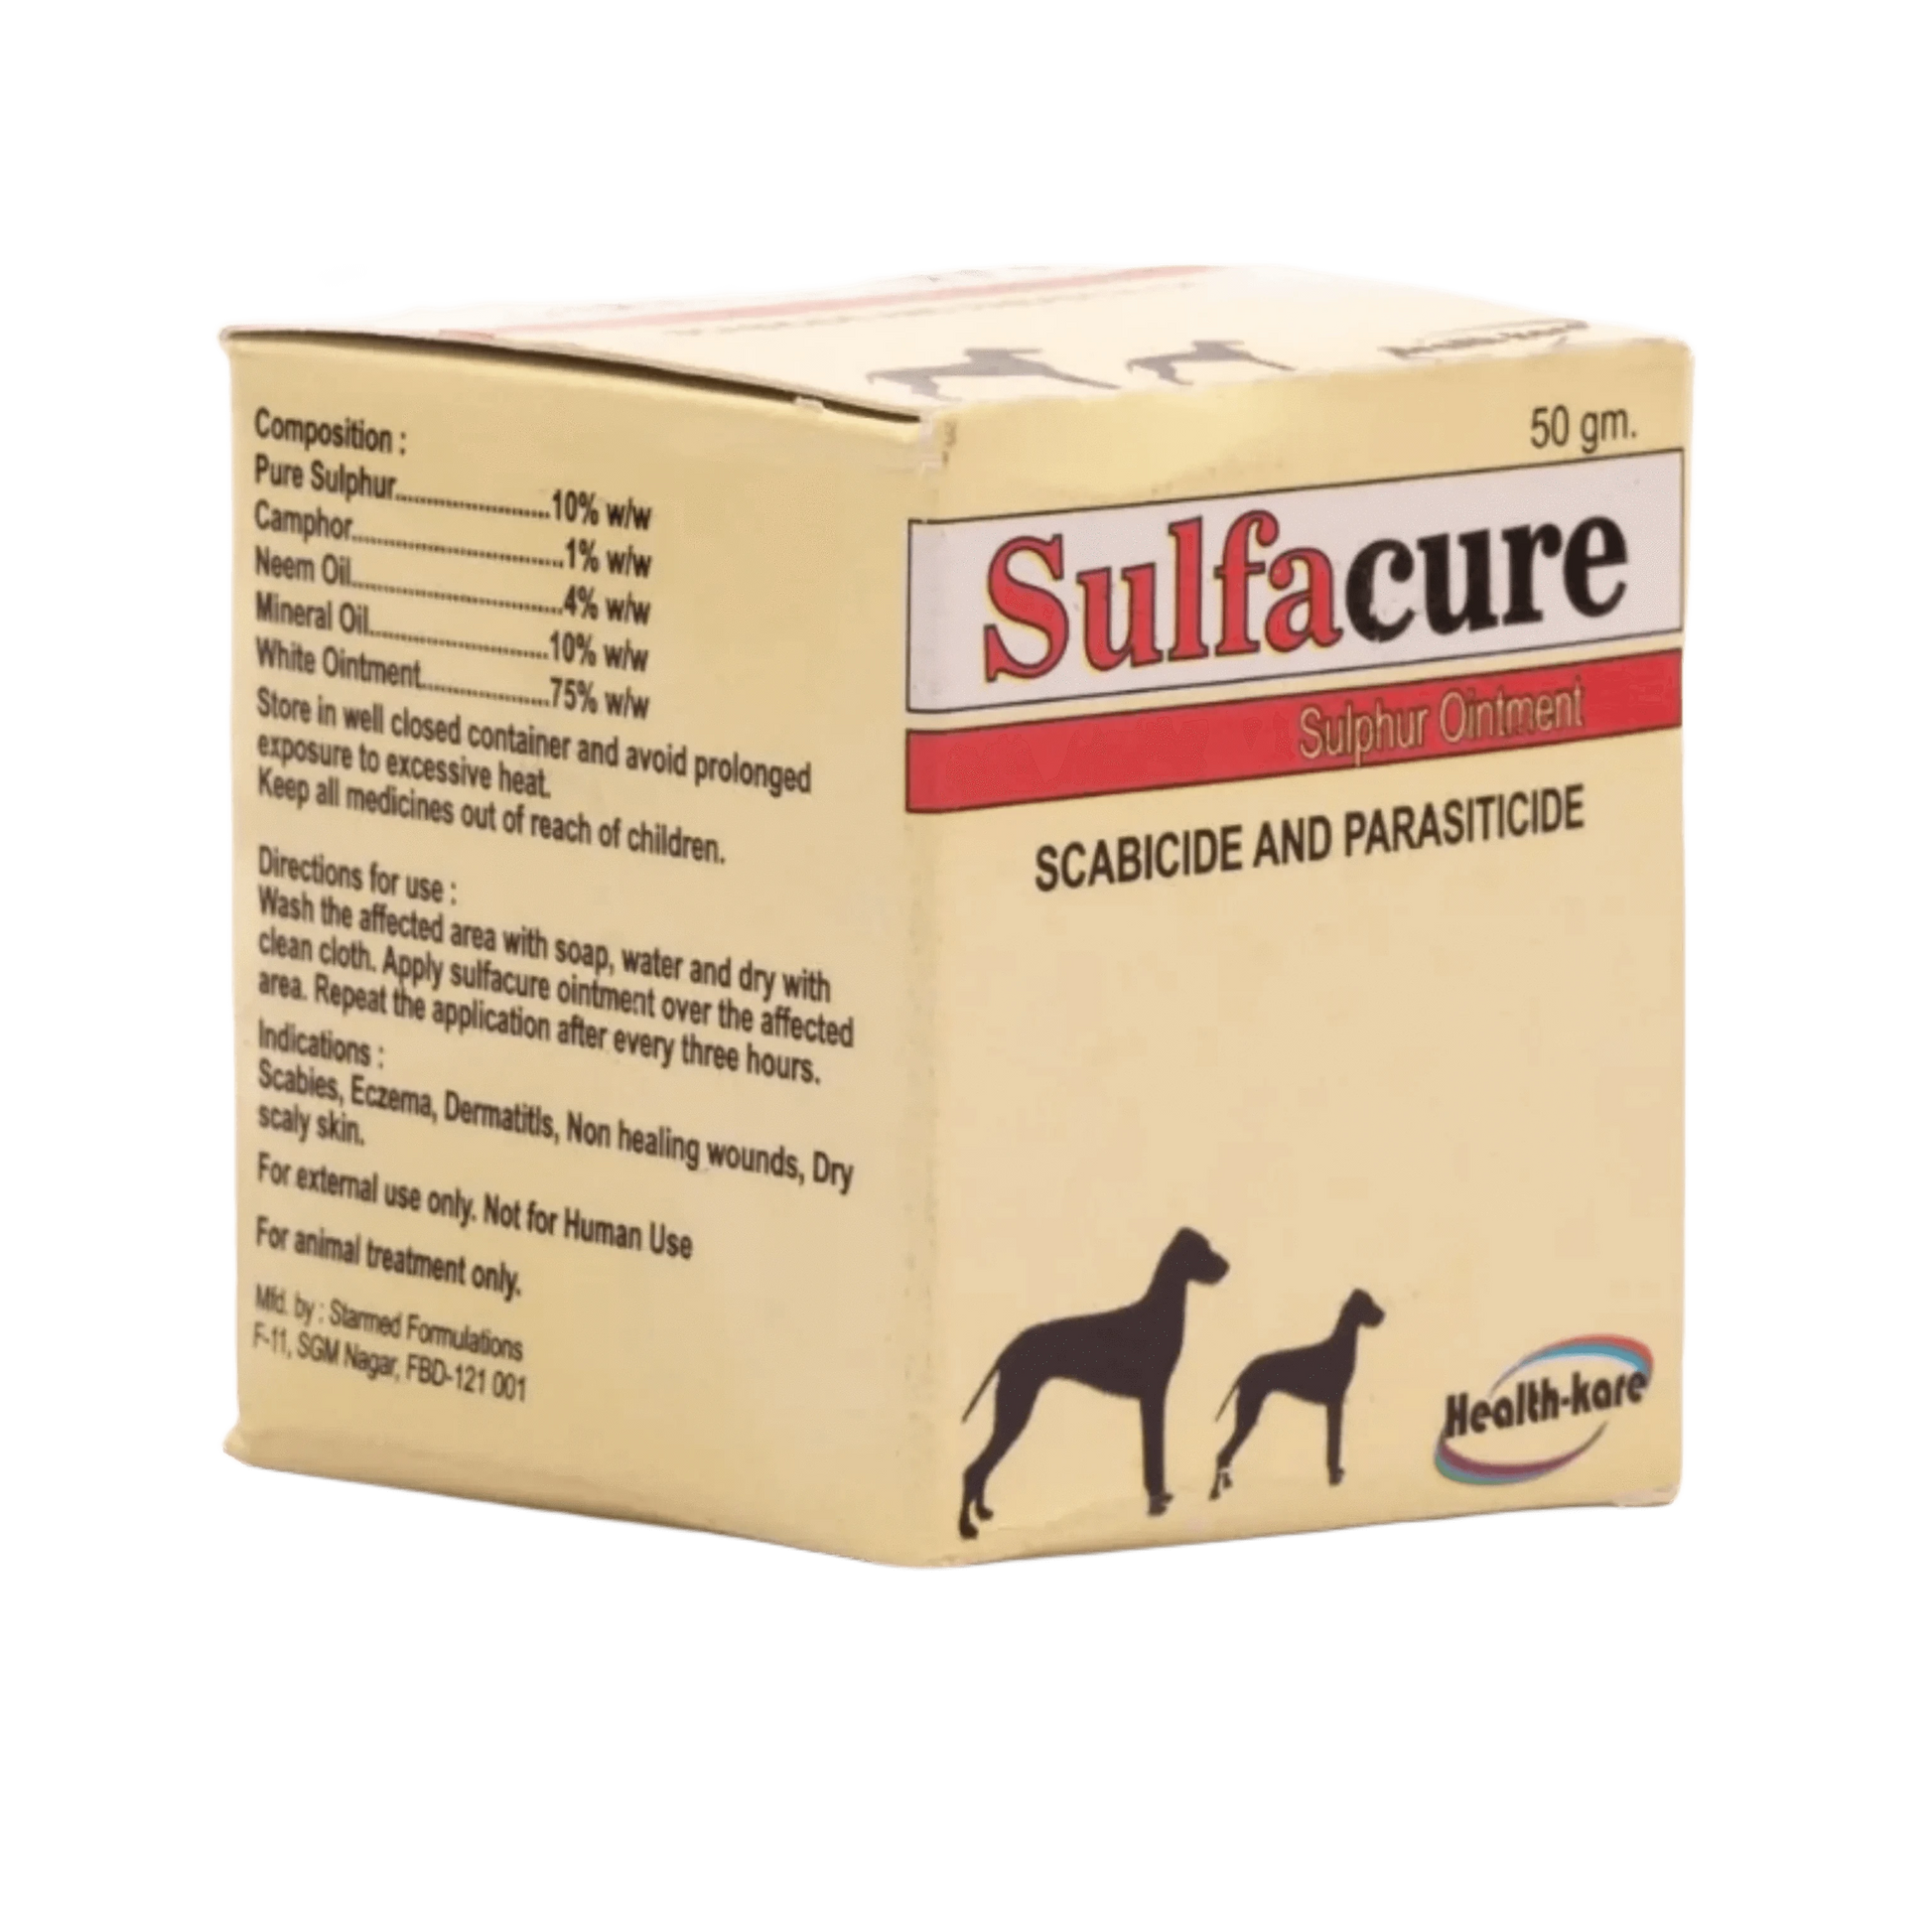 SULFACURE OINTMENT 50GM